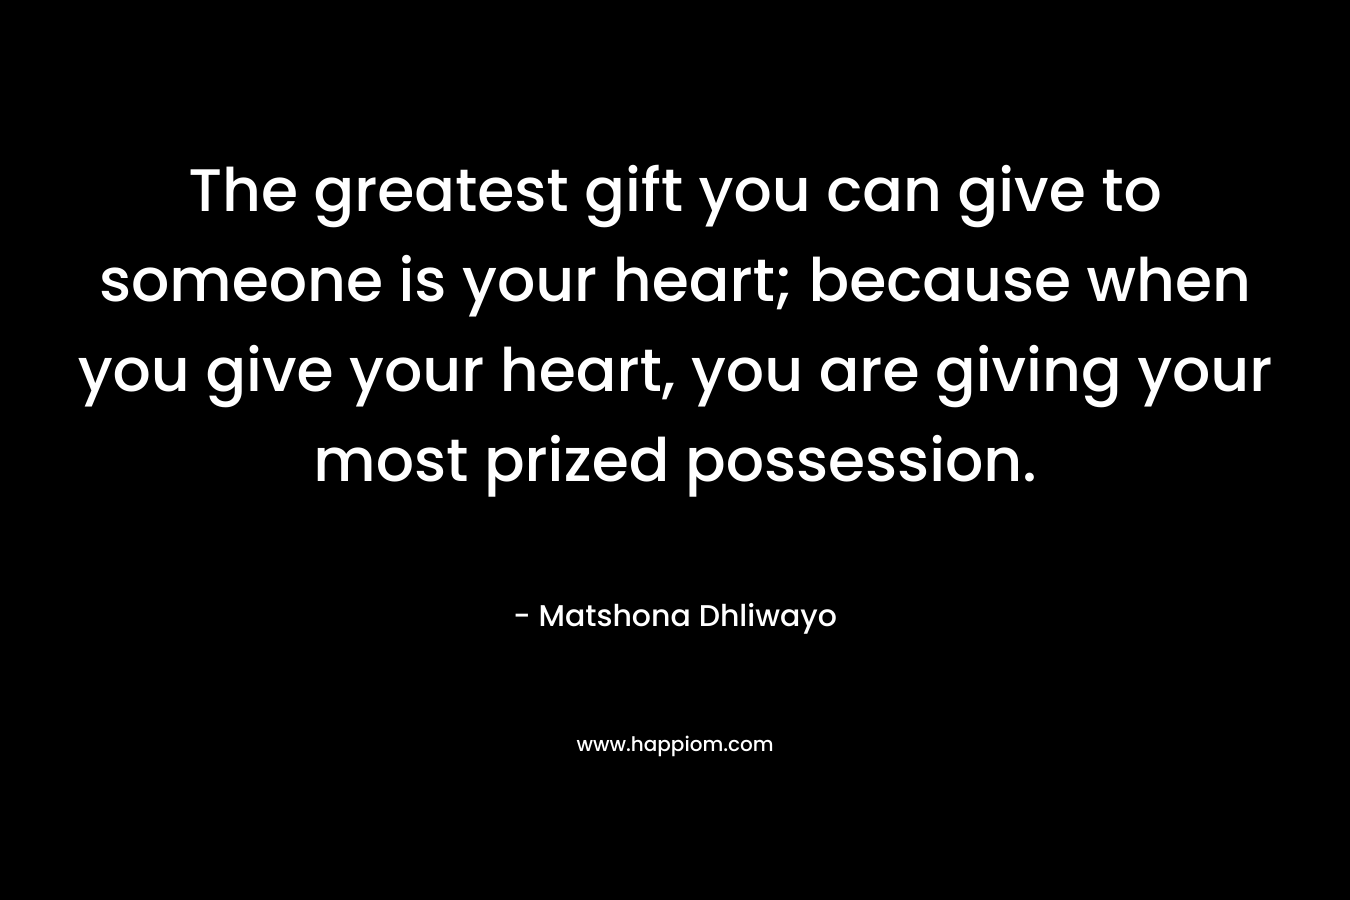 The greatest gift you can give to someone is your heart; because when you give your heart, you are giving your most prized possession.